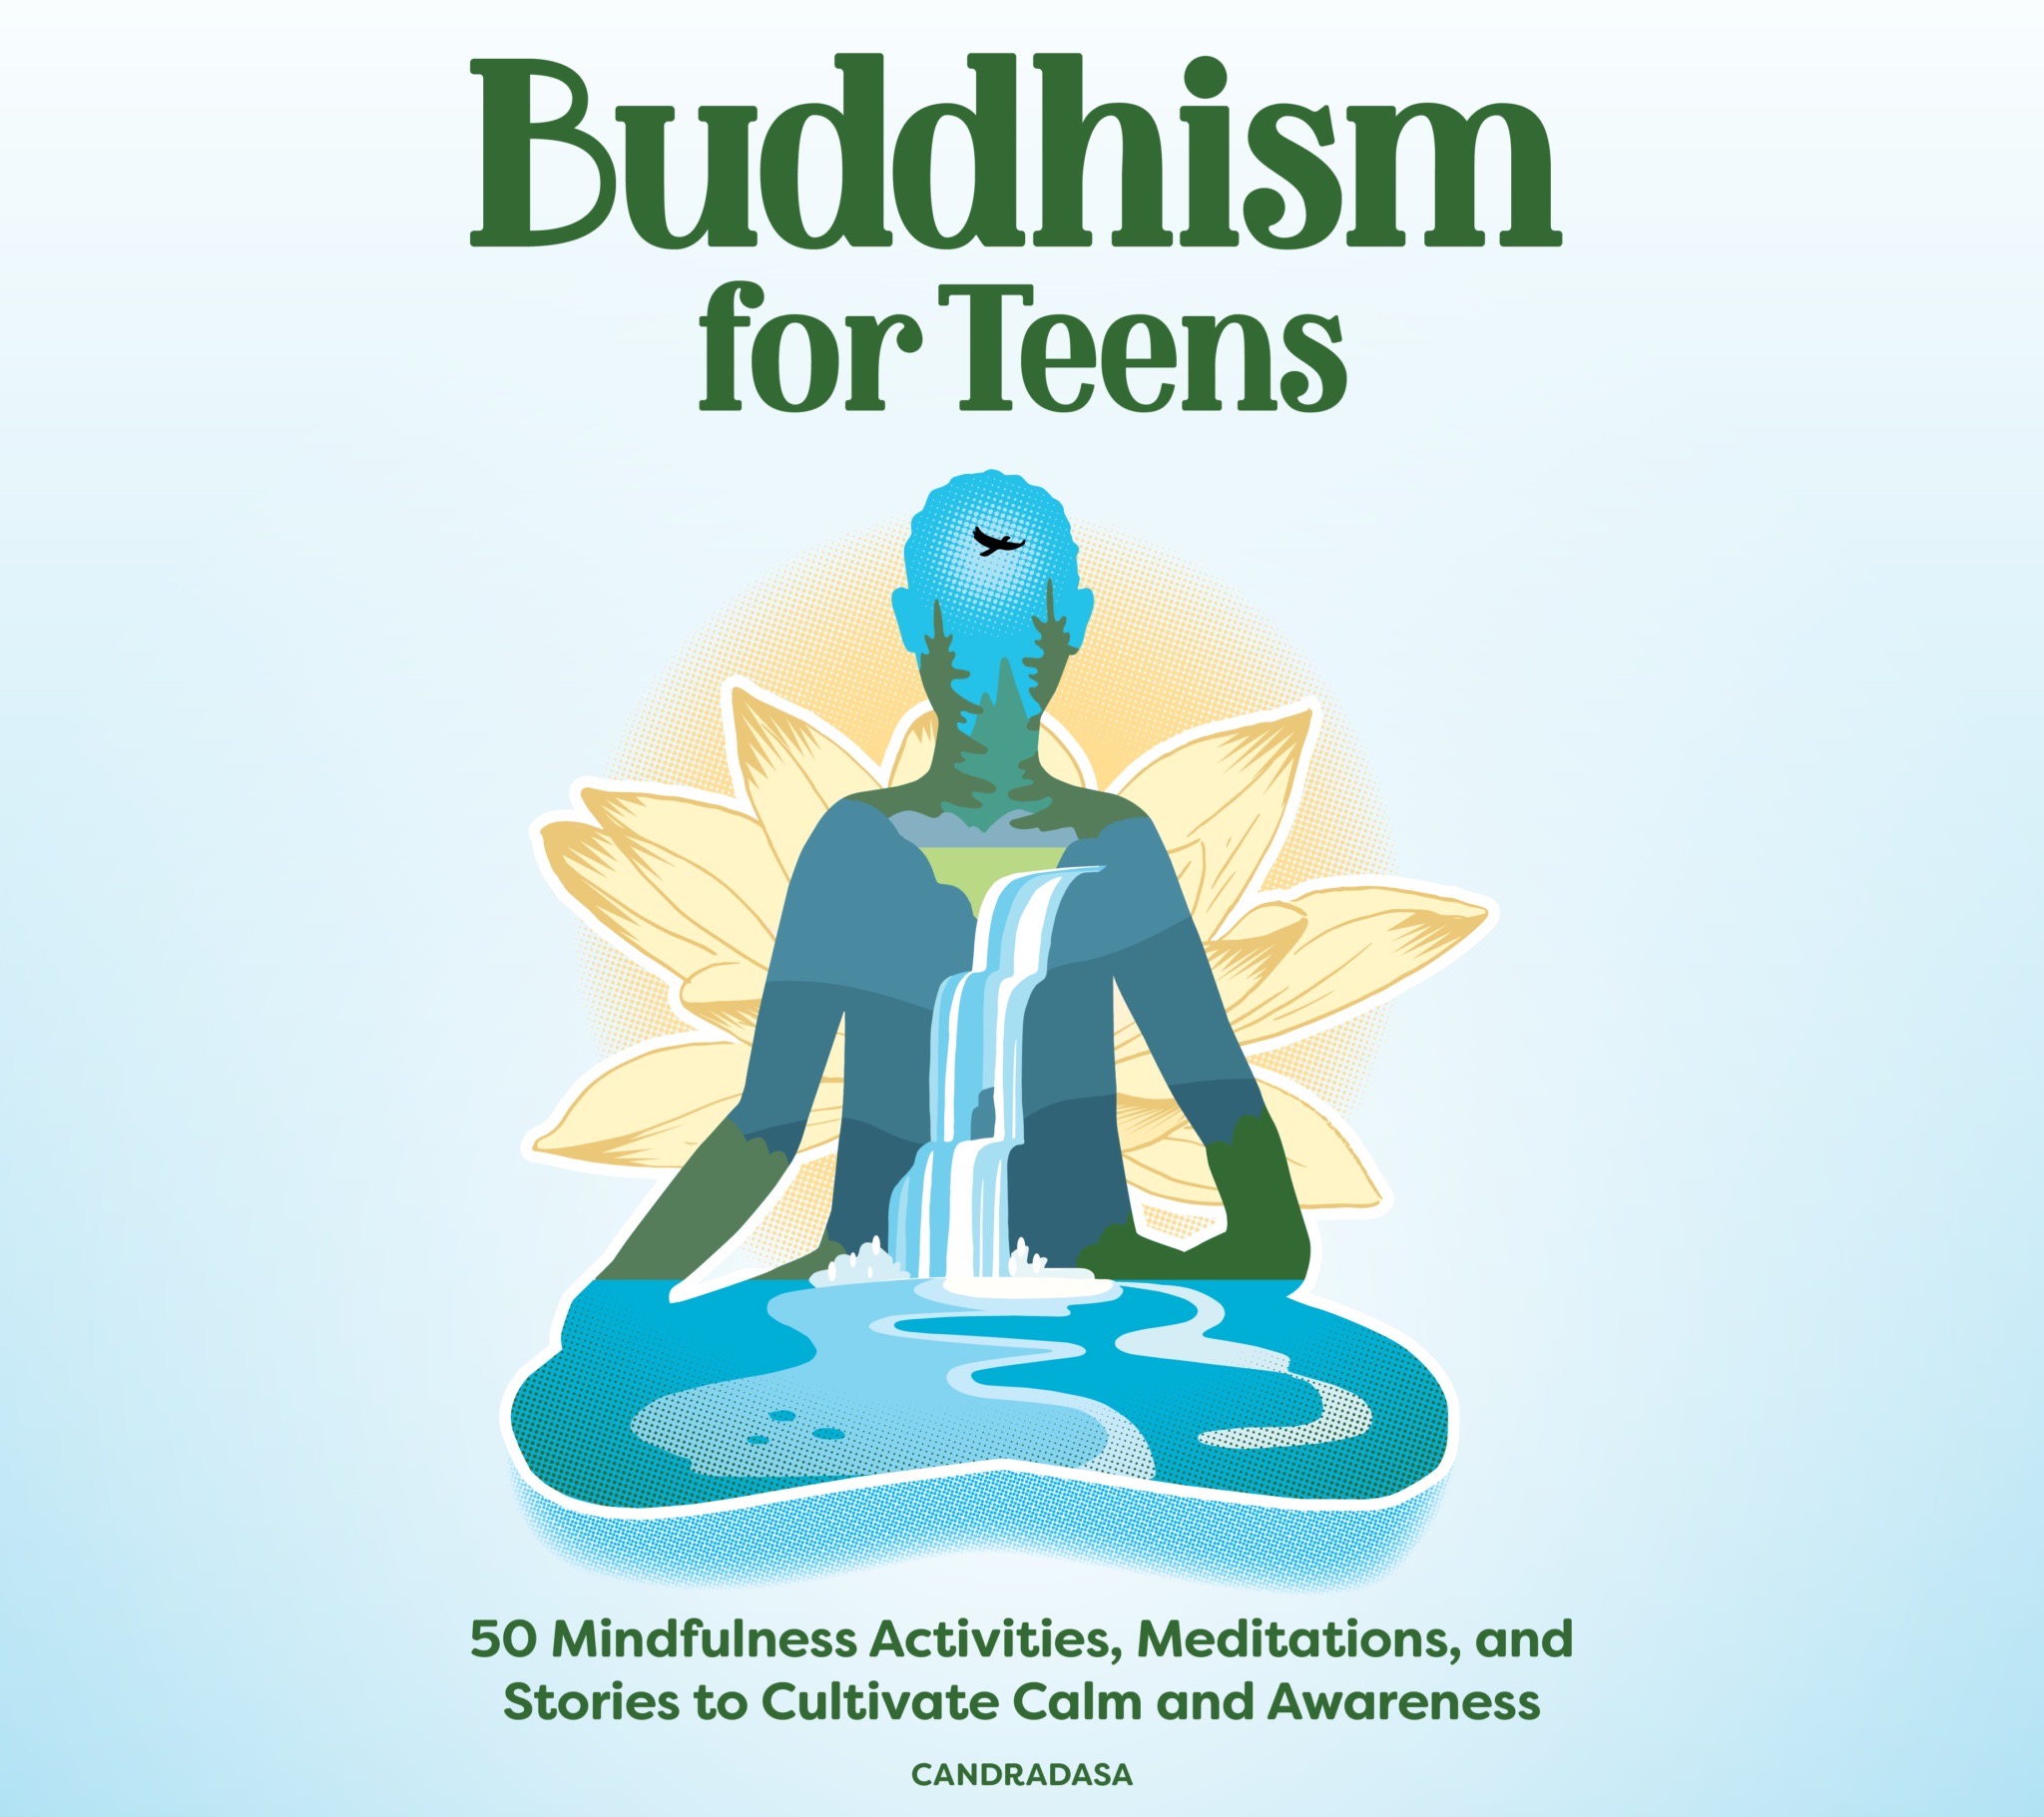 Scaricamento Buddhism For Teens (The Buddhist Centre Podcast, Episode 424)